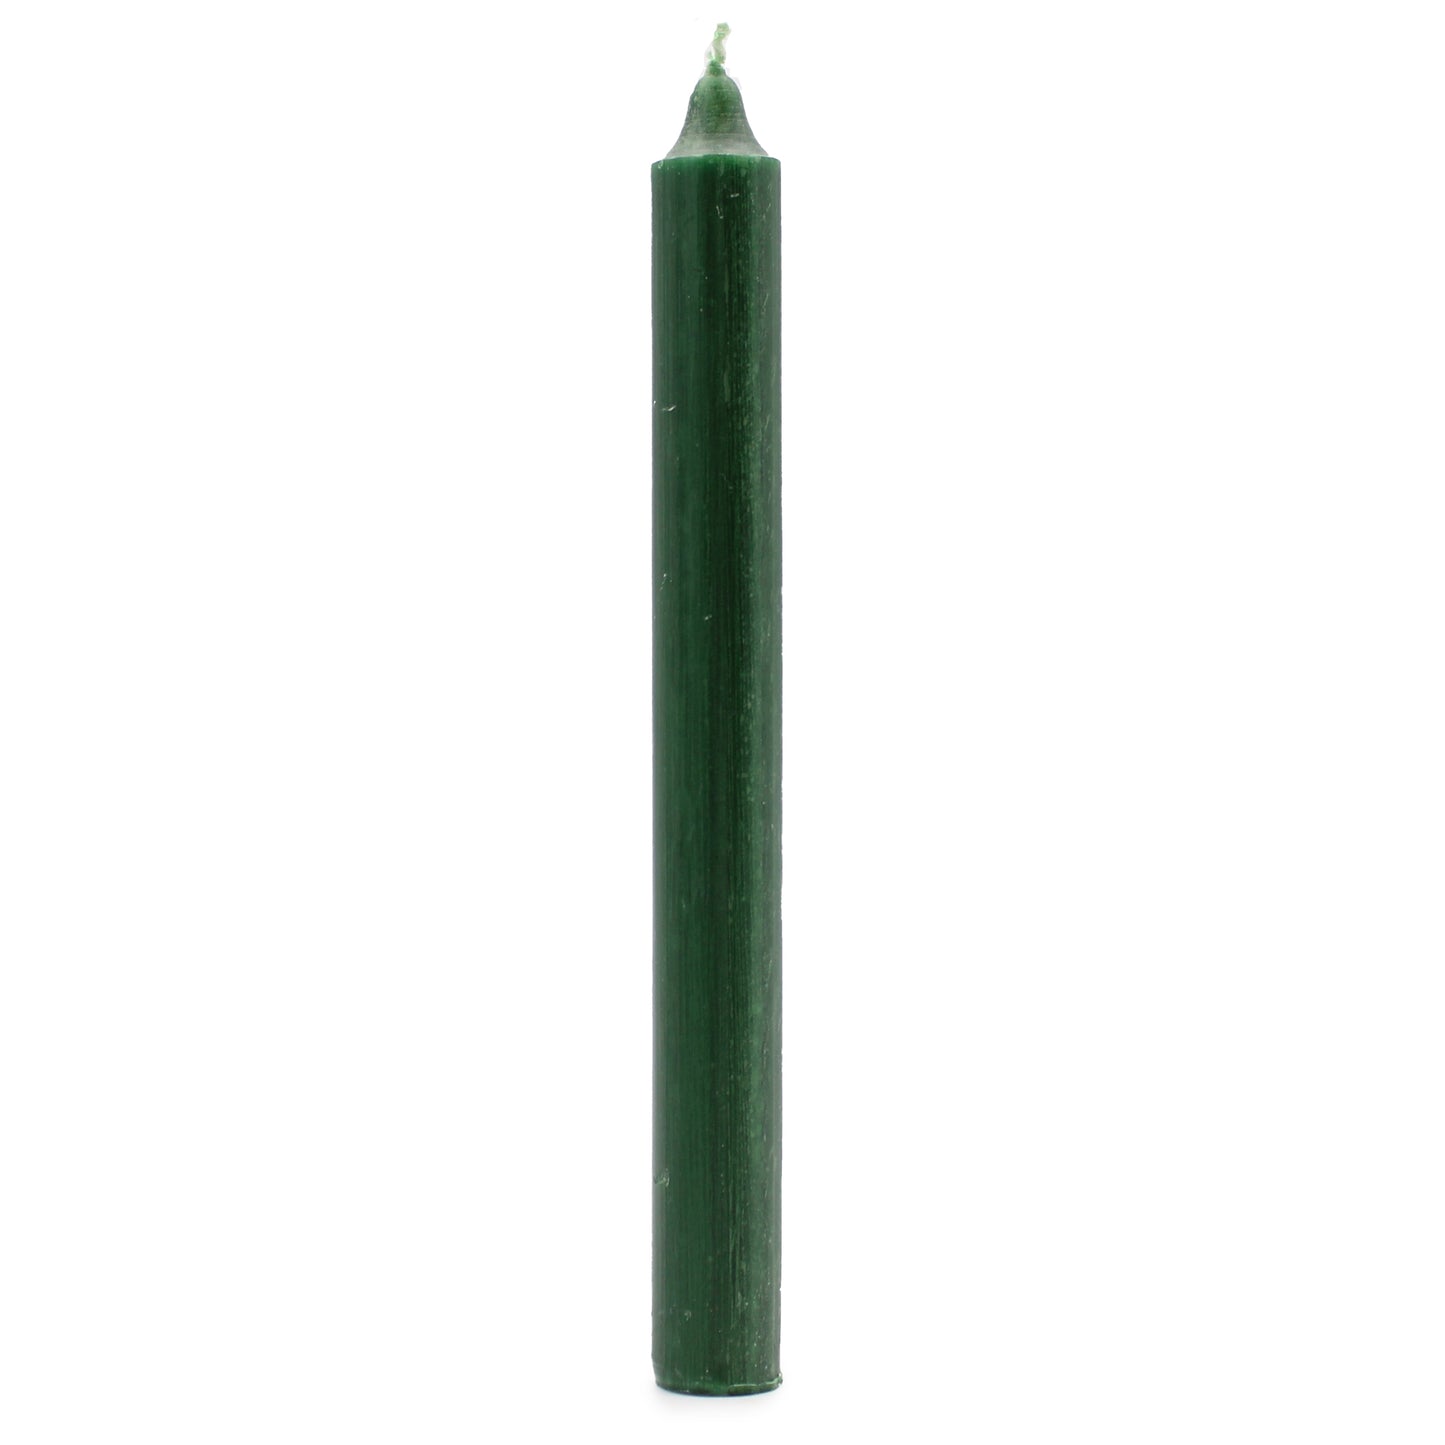 Solid Colour Dinner Candles - Rustic Holly Green - Pack of 5